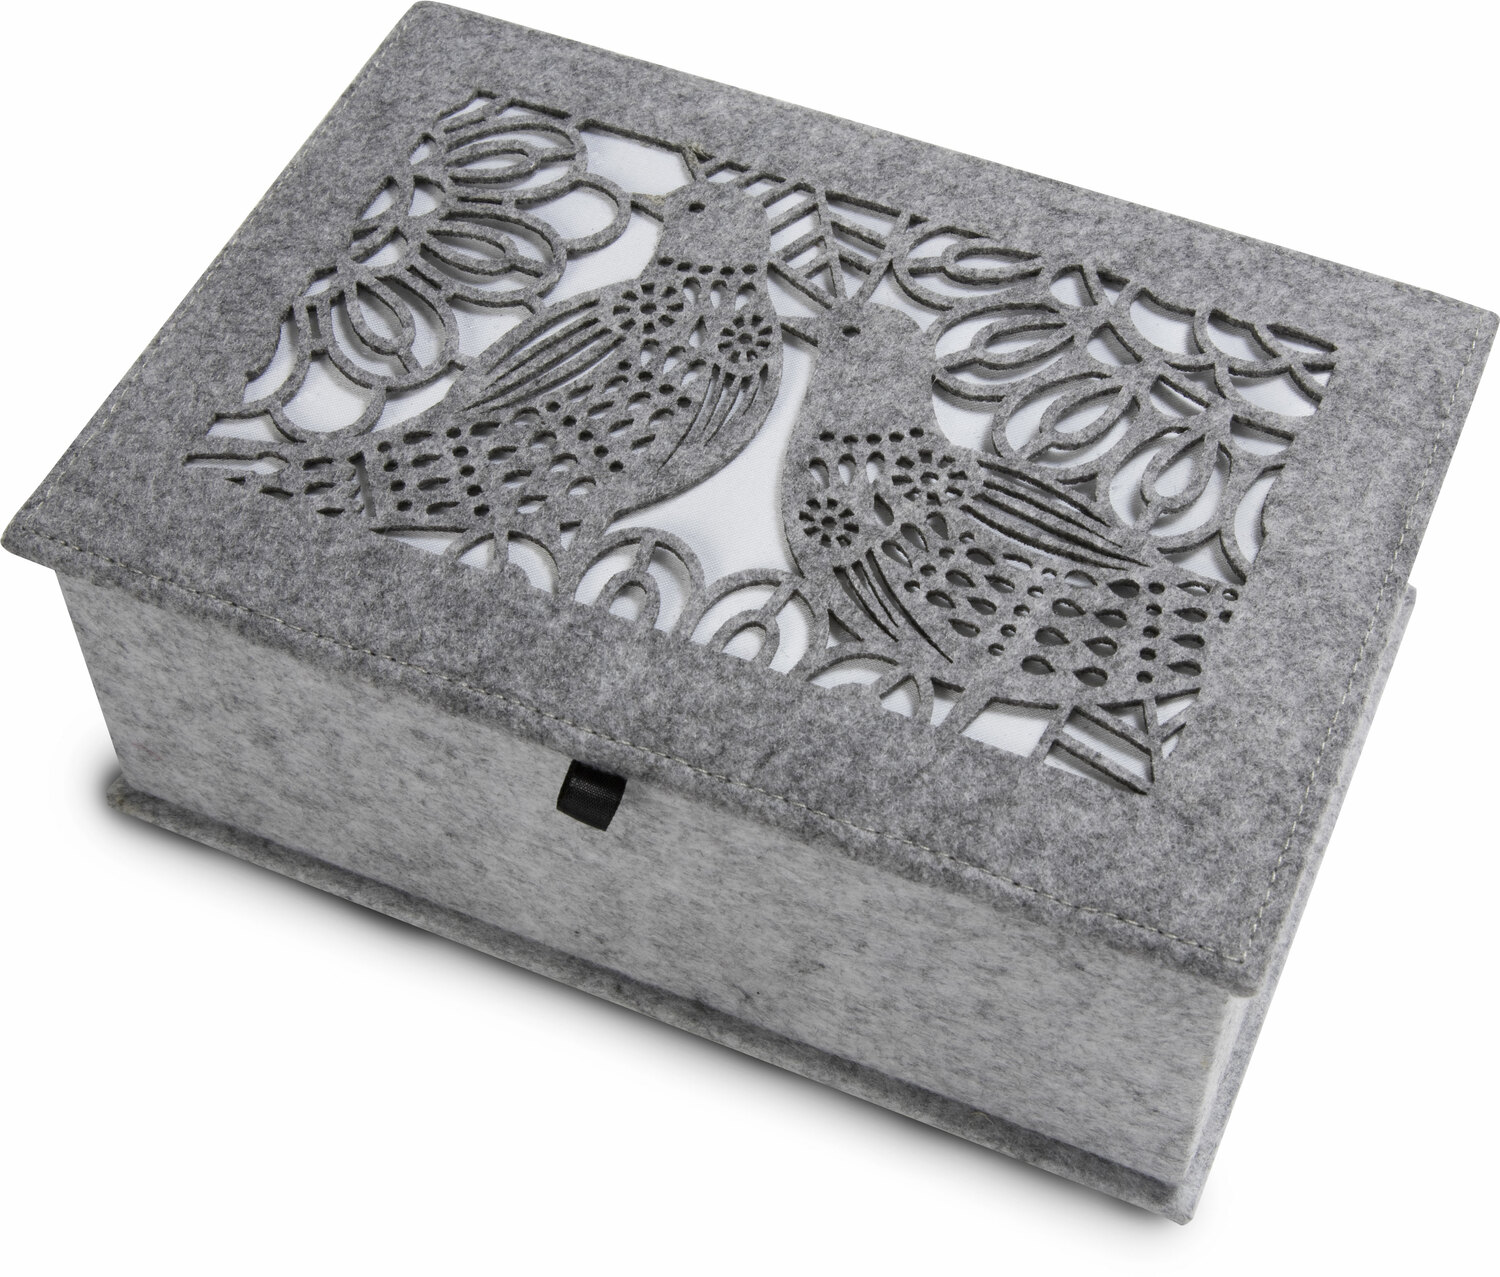 Heather Gray and Ivory by H2Z Felt Accessories - Heather Gray and Ivory - 9.75" x 6.75" x 3.75" Large Jewelry Box